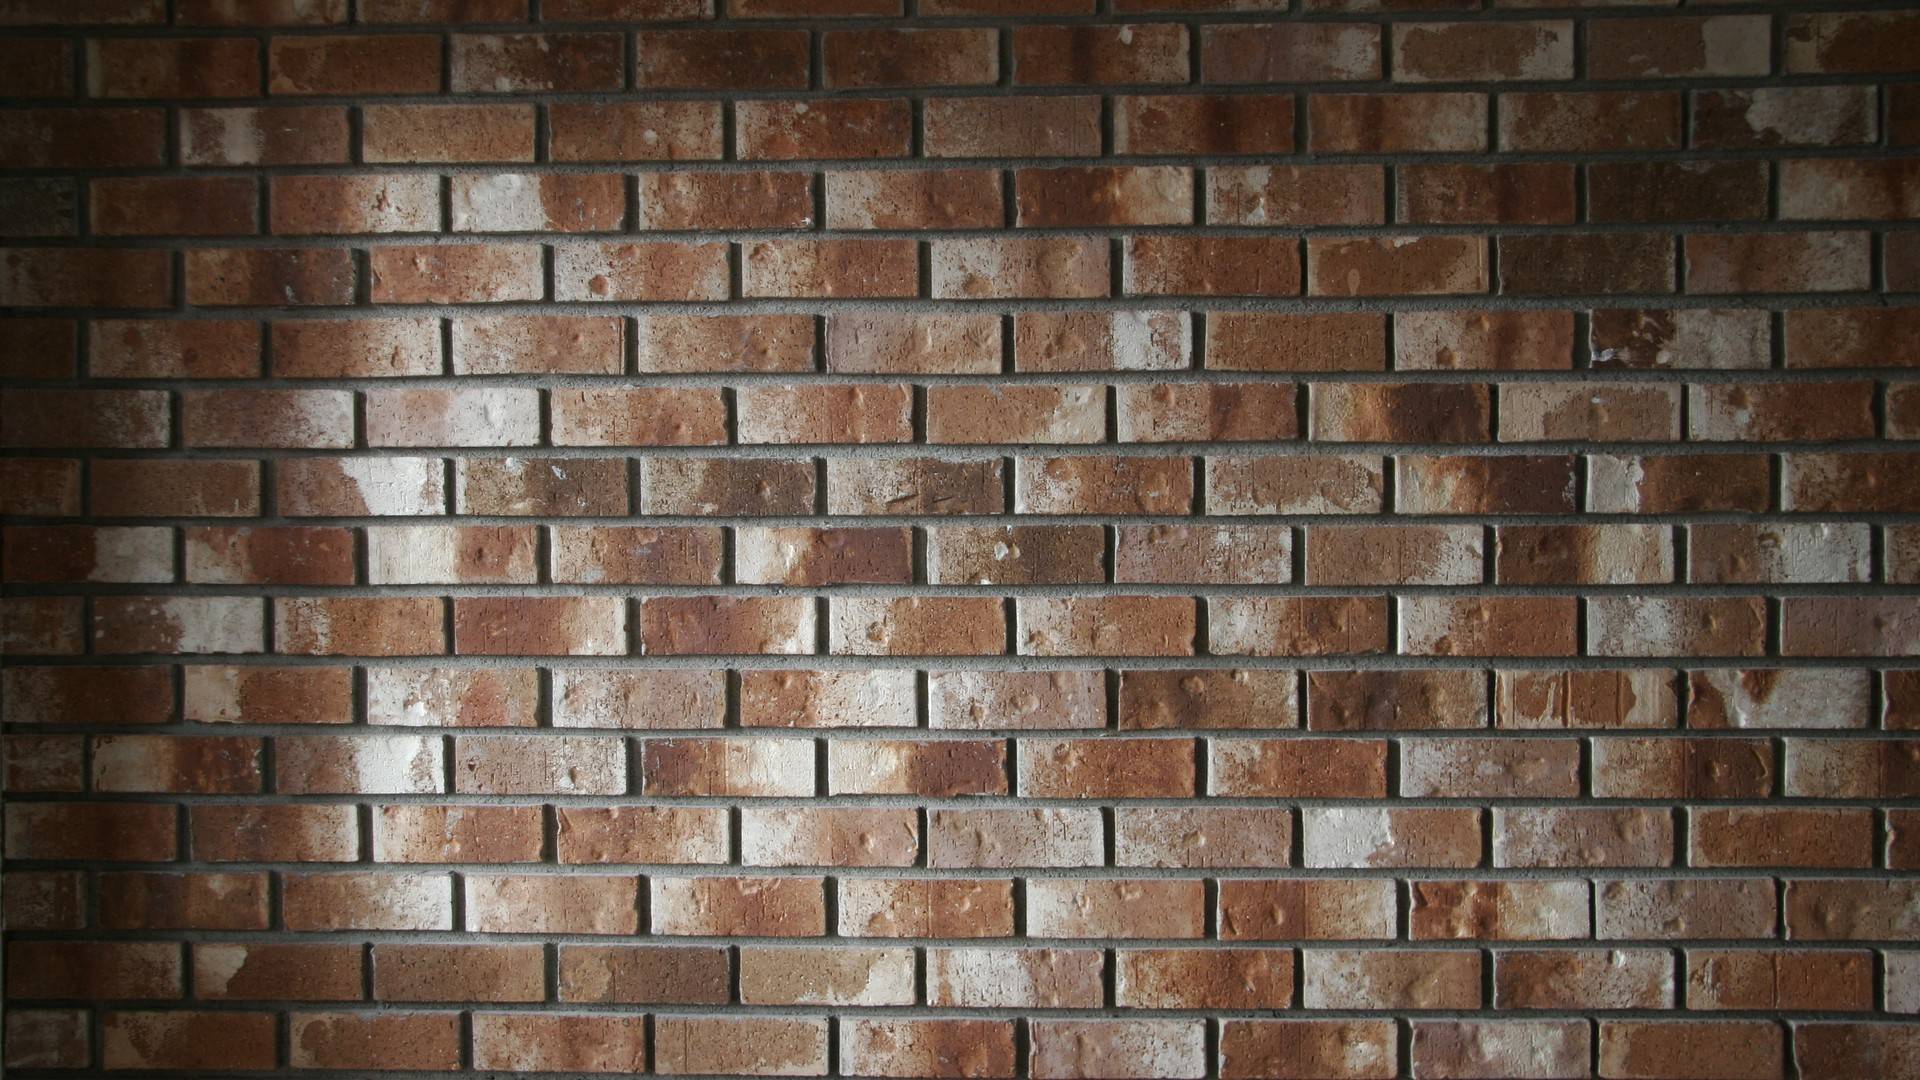 Anime Brick Wall 1920x1080 Wallpaper Teahub Io Find over 100+ of the best free brick wall images. anime brick wall 1920x1080 wallpaper